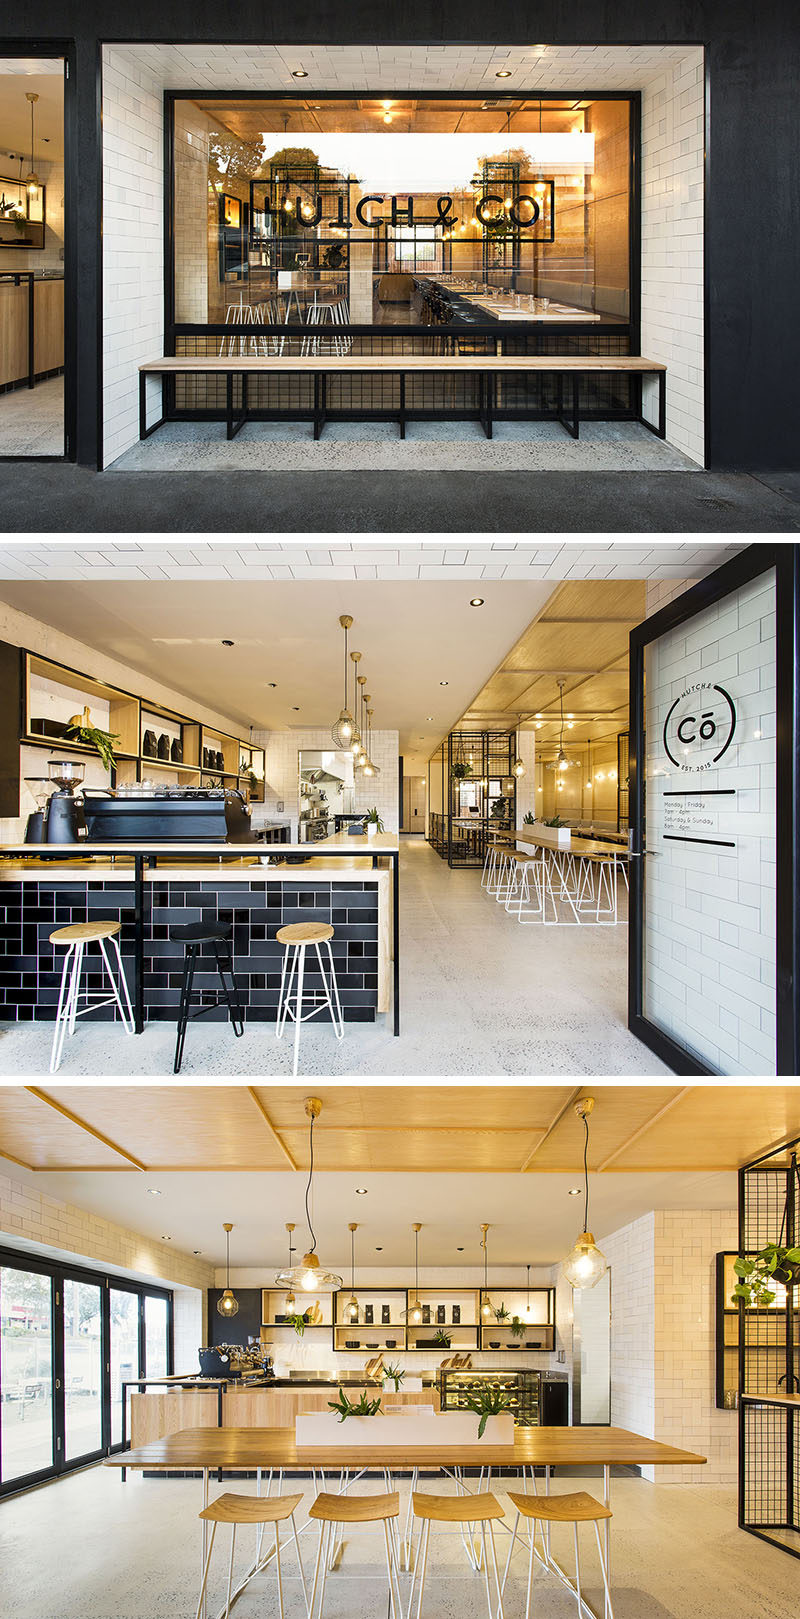 Biasol designed Hutch & Co, a cafe and restaurant in Melbourne, Australia, that combines black elements like window frames, tiles and metal work with light wood and white furniture, and concrete floors.